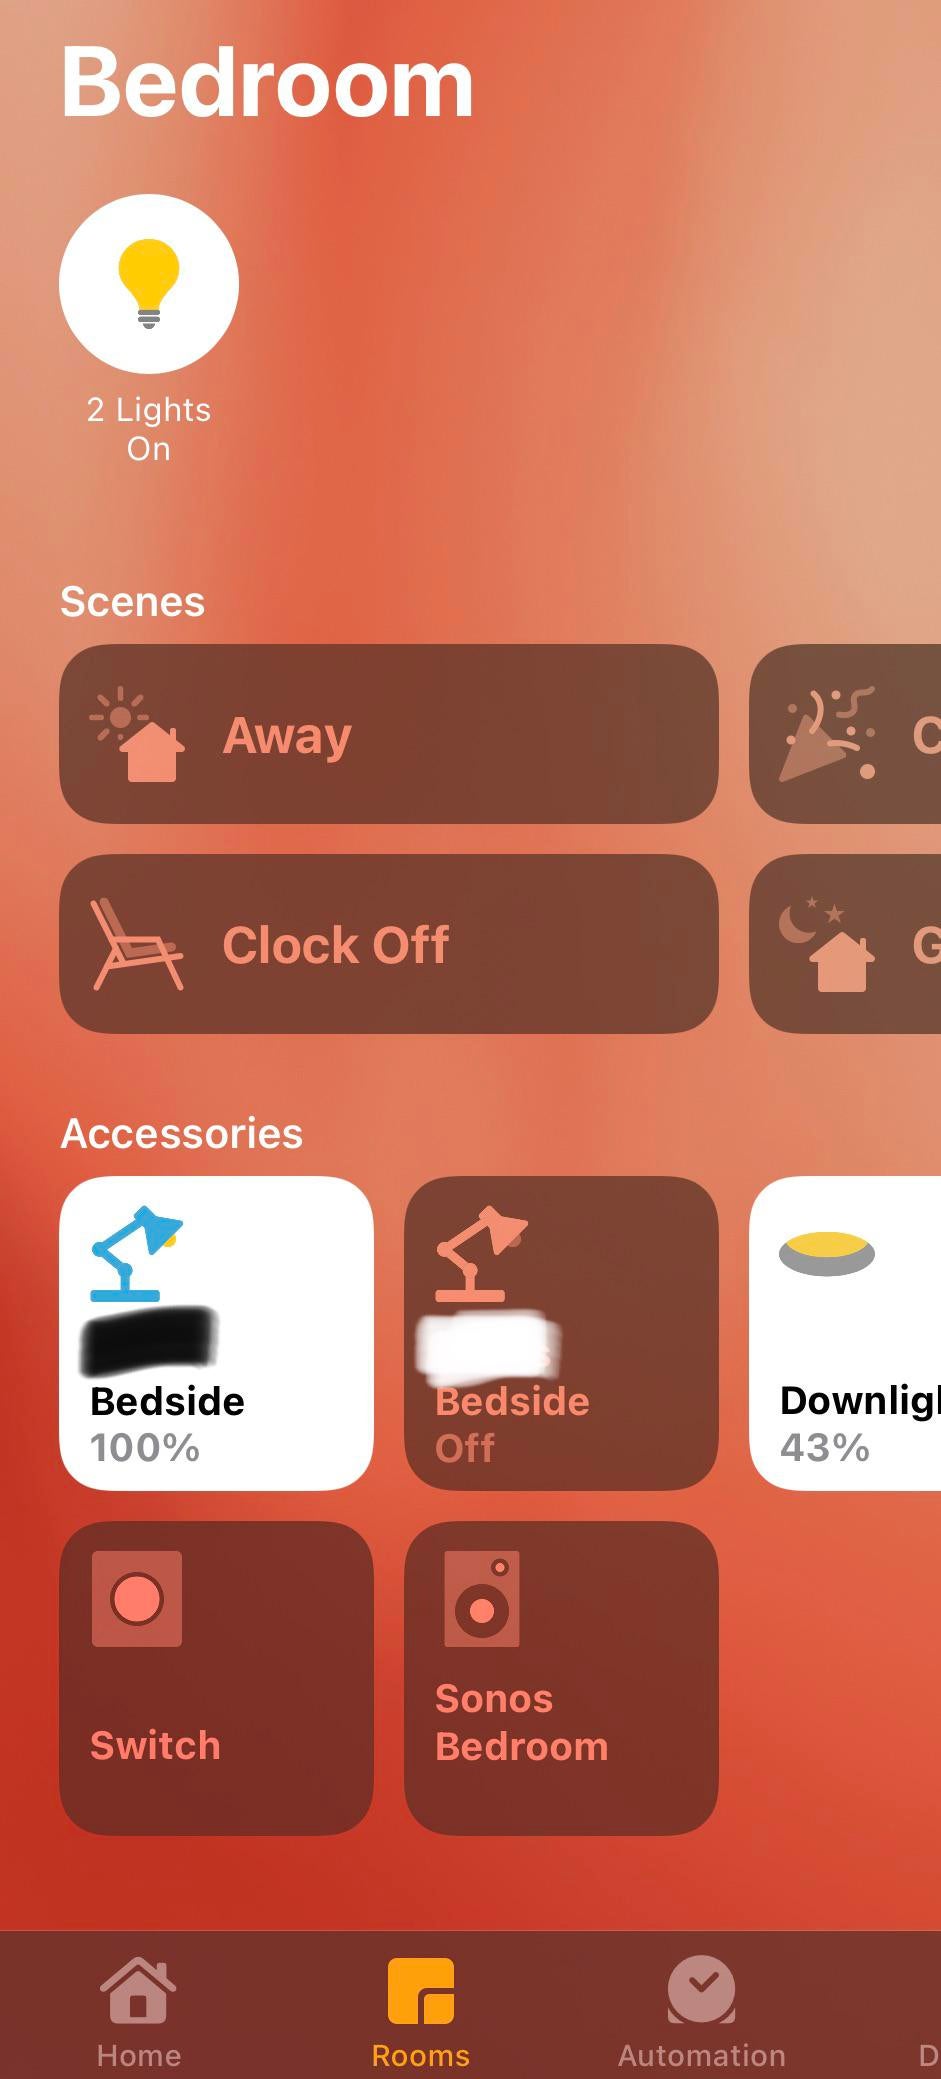 Does HomeKit recognize personal devices only by name